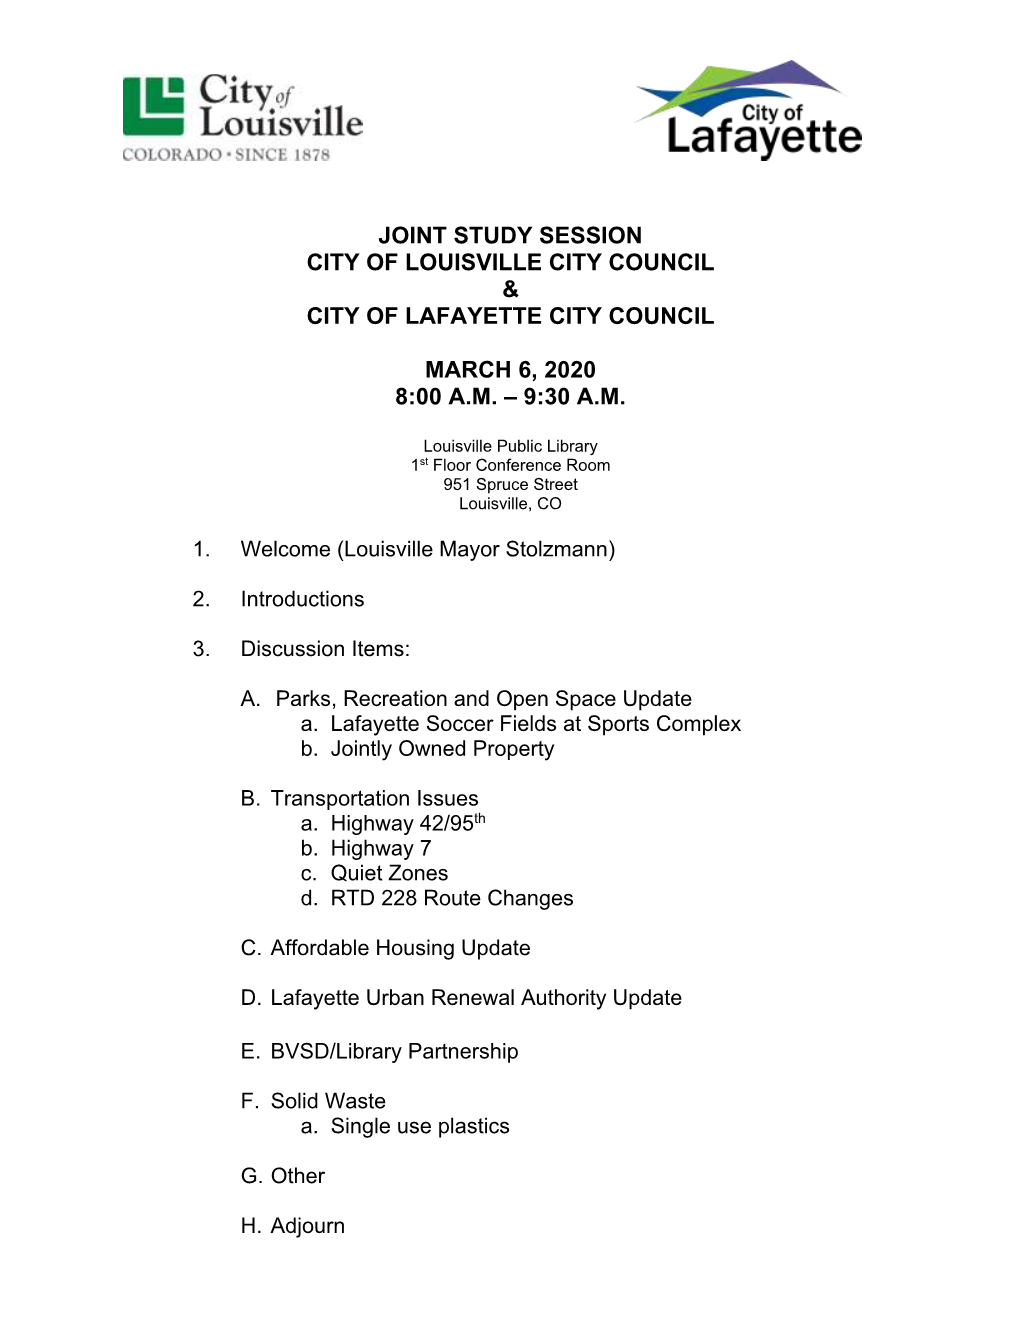 March 6 Joint Study Session with City of Louisville